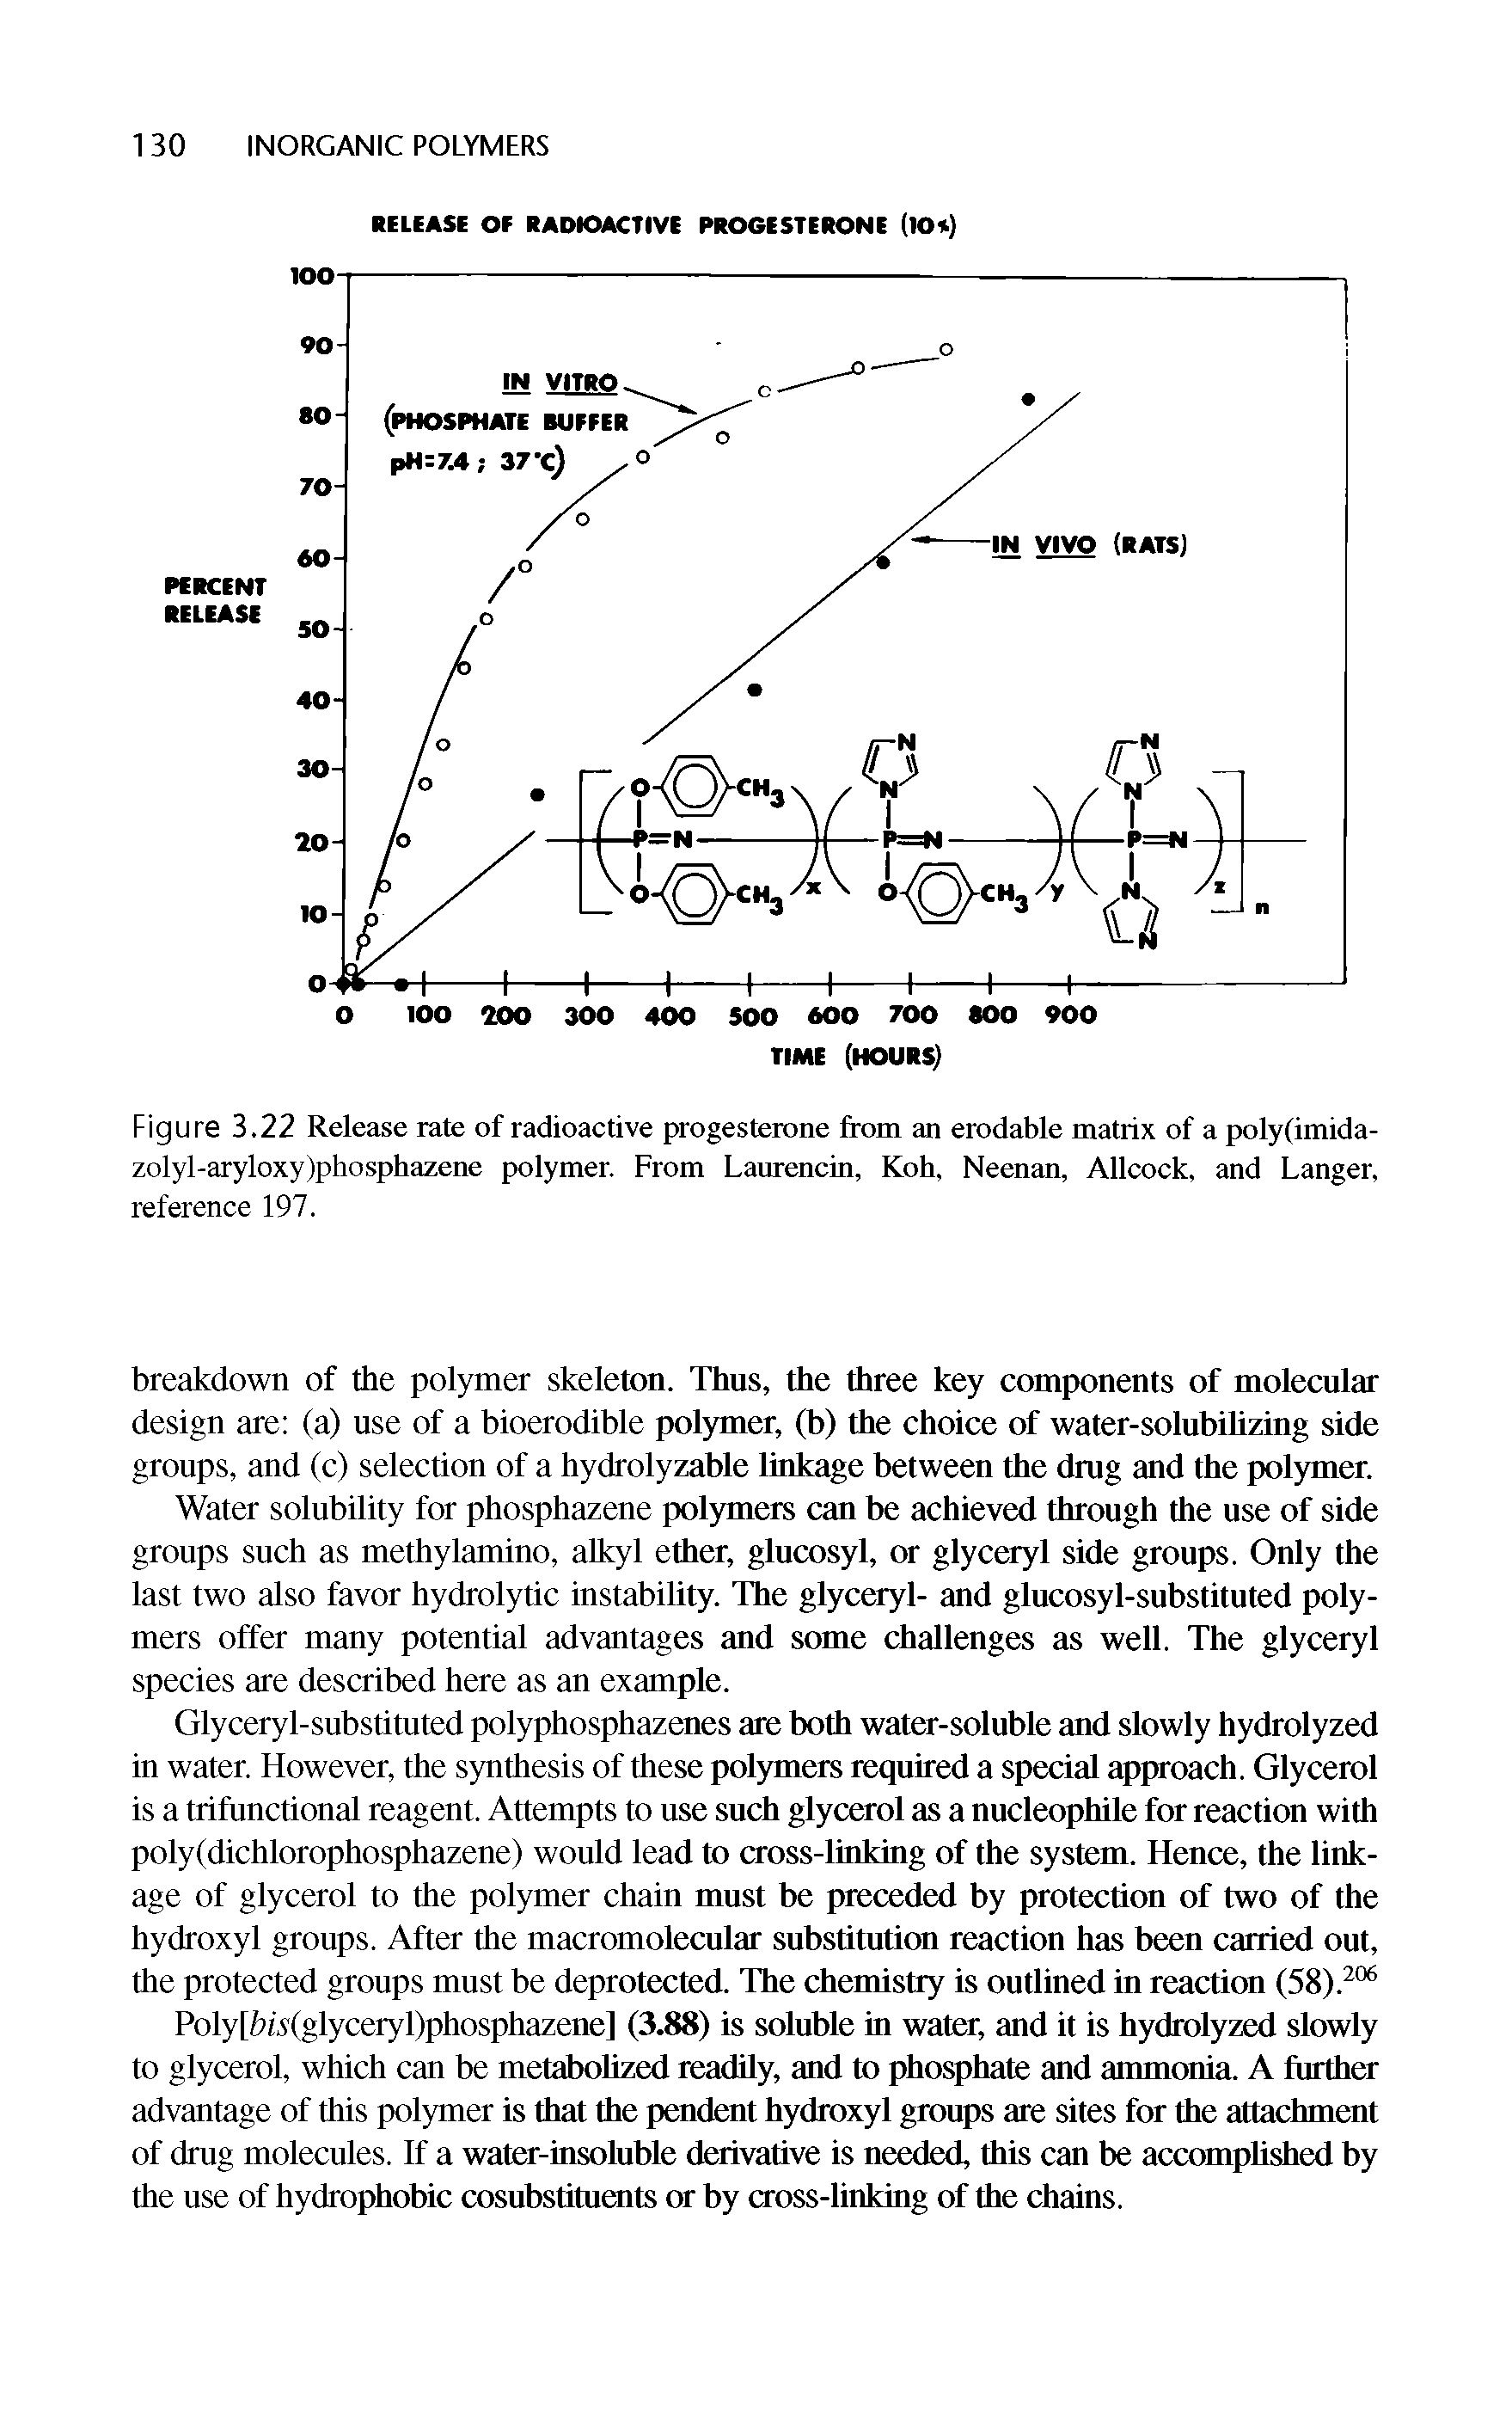 Figure 3.22 Release rate of radioactive progesterone from an erodable matrix of a poly(imida-zolyl-aryloxy)phosphazene polymer. From Laurencin, Koh, Neenan, Allcock, and Langer, reference 197.